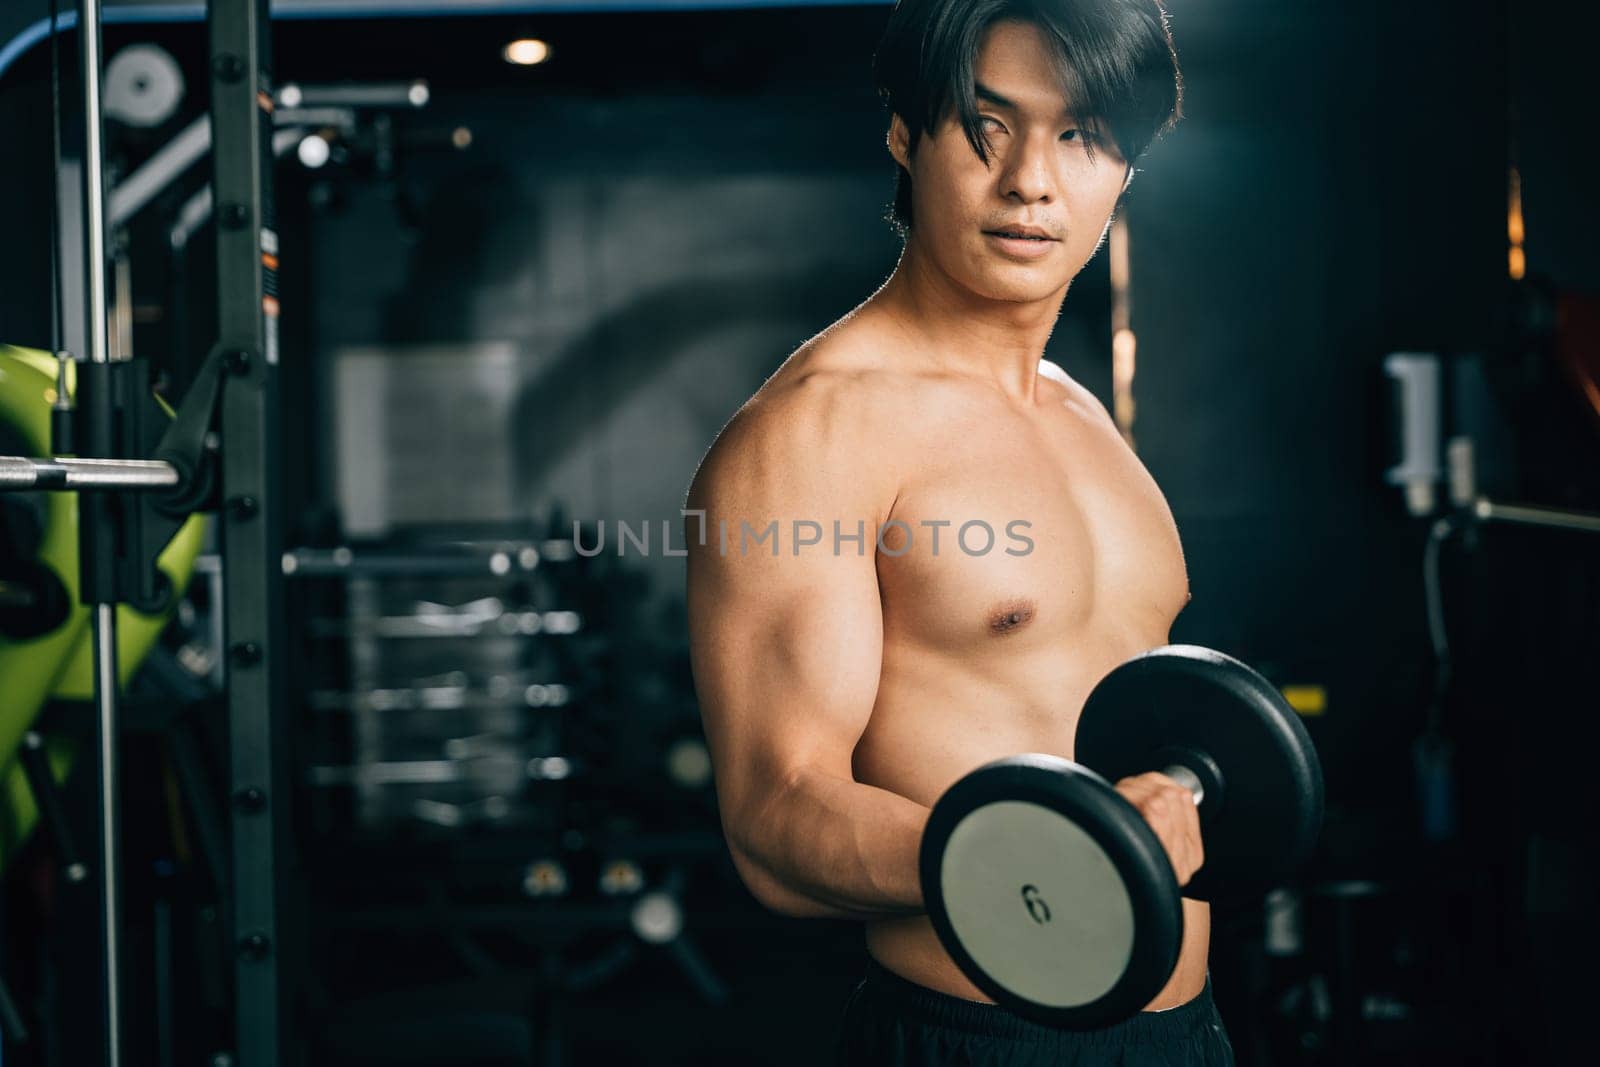 A muscular man with a strong physique lifts weights, his hand holding a heavy dumbbell, showing his hard work and dedication to his workout routine. Fitness GYM Healthy sports lifestyle concept